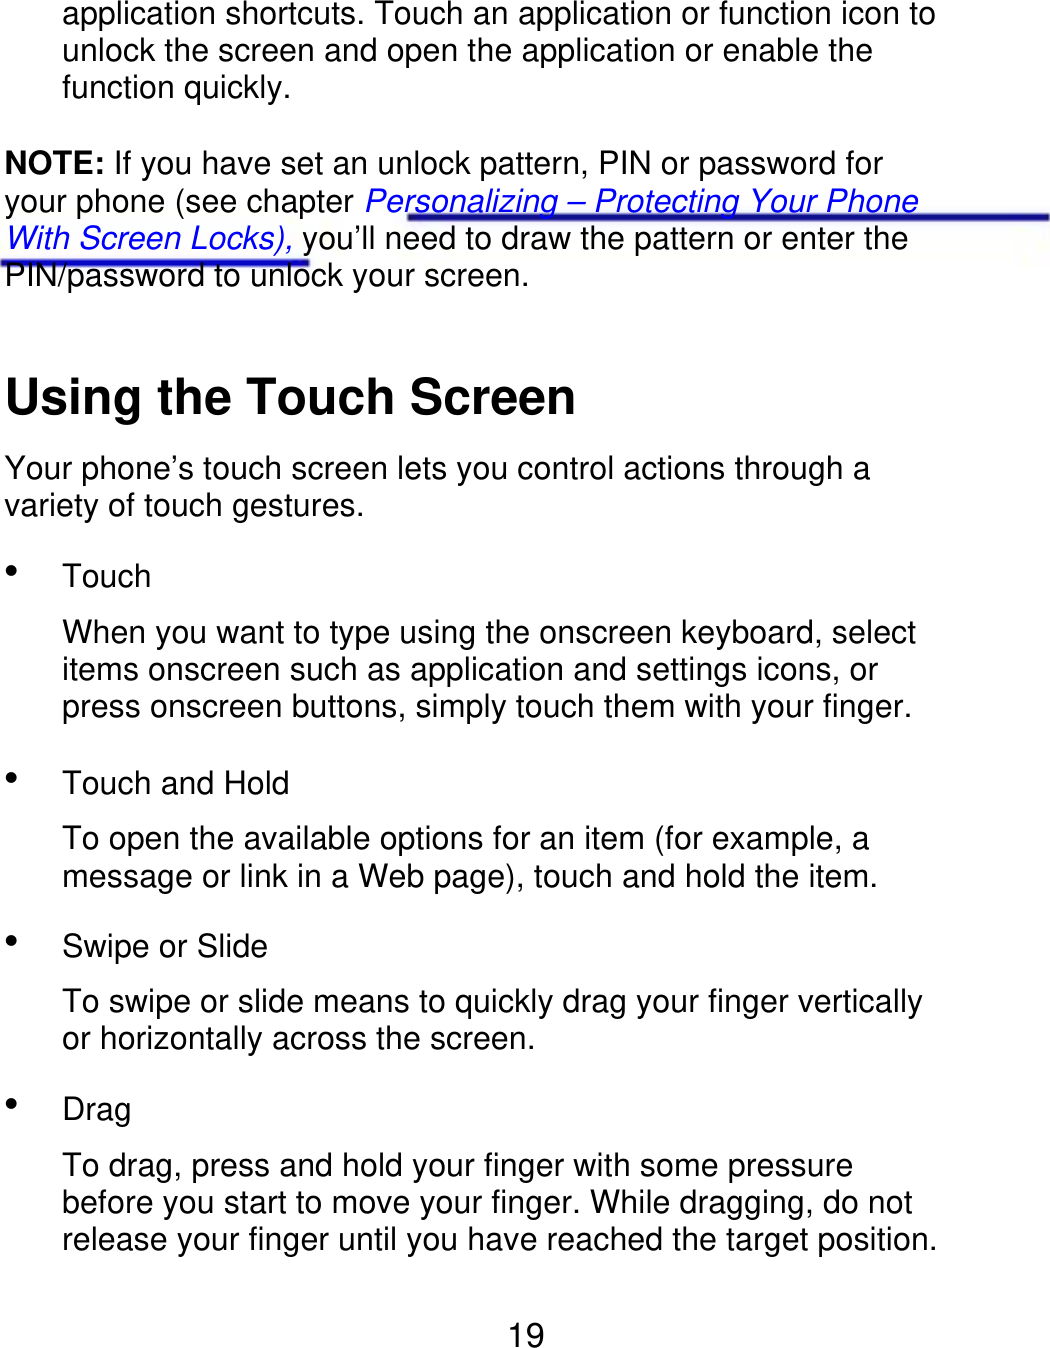 application shortcuts. Touch an application or function icon to unlock the screen and open the application or enable the function quickly. NOTE: If you have set an unlock pattern, PIN or password for your phone (see chapter Personalizing – Protecting Your Phone With Screen Locks), you’ll need to draw the pattern or enter the PIN/password to unlock your screen. Using the Touch Screen Your phone’s touch screen lets you control actions through a variety of touch gestures.  Touch When you want to type using the onscreen keyboard, select items onscreen such as application and settings icons, or press onscreen buttons, simply touch them with your finger.  Touch and Hold To open the available options for an item (for example, a message or link in a Web page), touch and hold the item.  Swipe or Slide To swipe or slide means to quickly drag your finger vertically or horizontally across the screen.  Drag To drag, press and hold your finger with some pressure before you start to move your finger. While dragging, do not release your finger until you have reached the target position. 19 